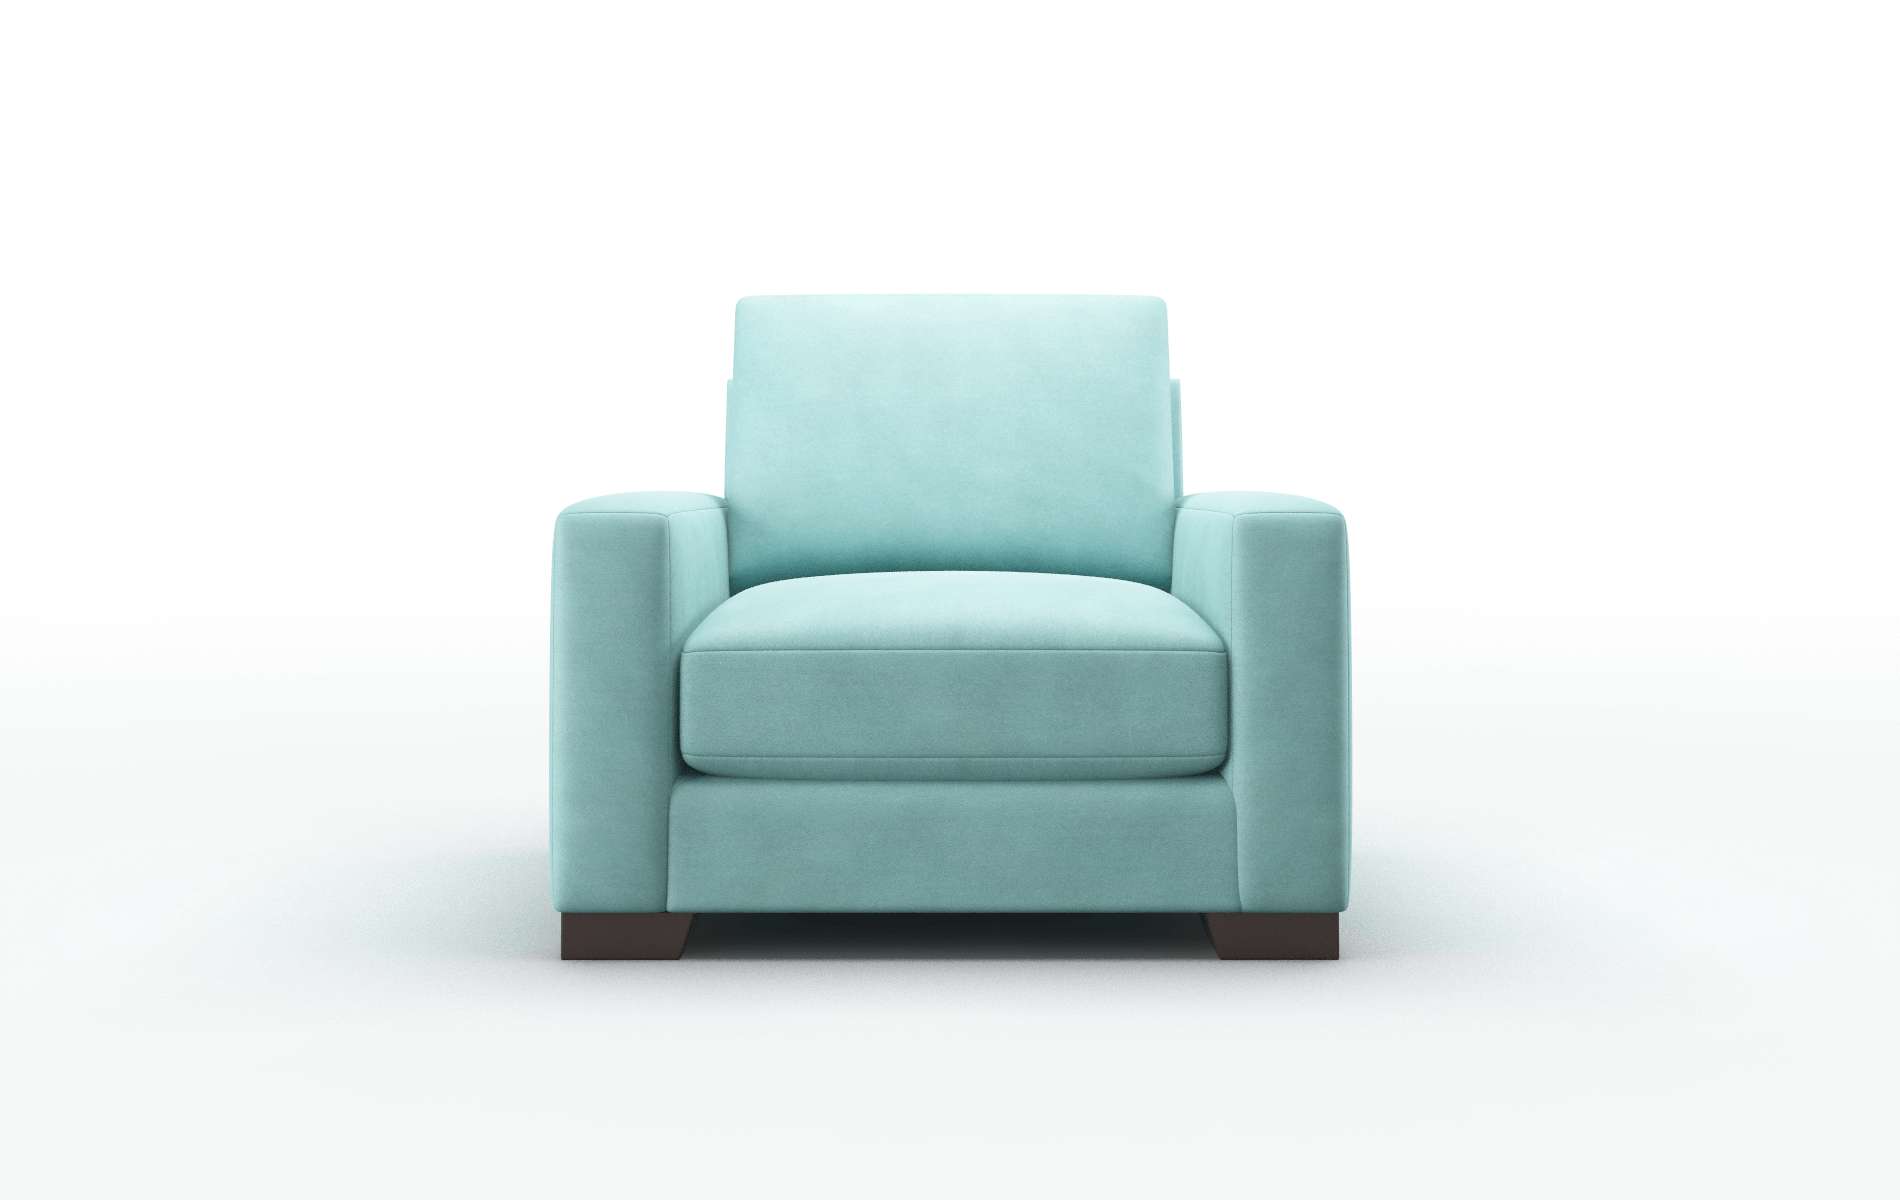 London Curious Turquoise chair espresso legs